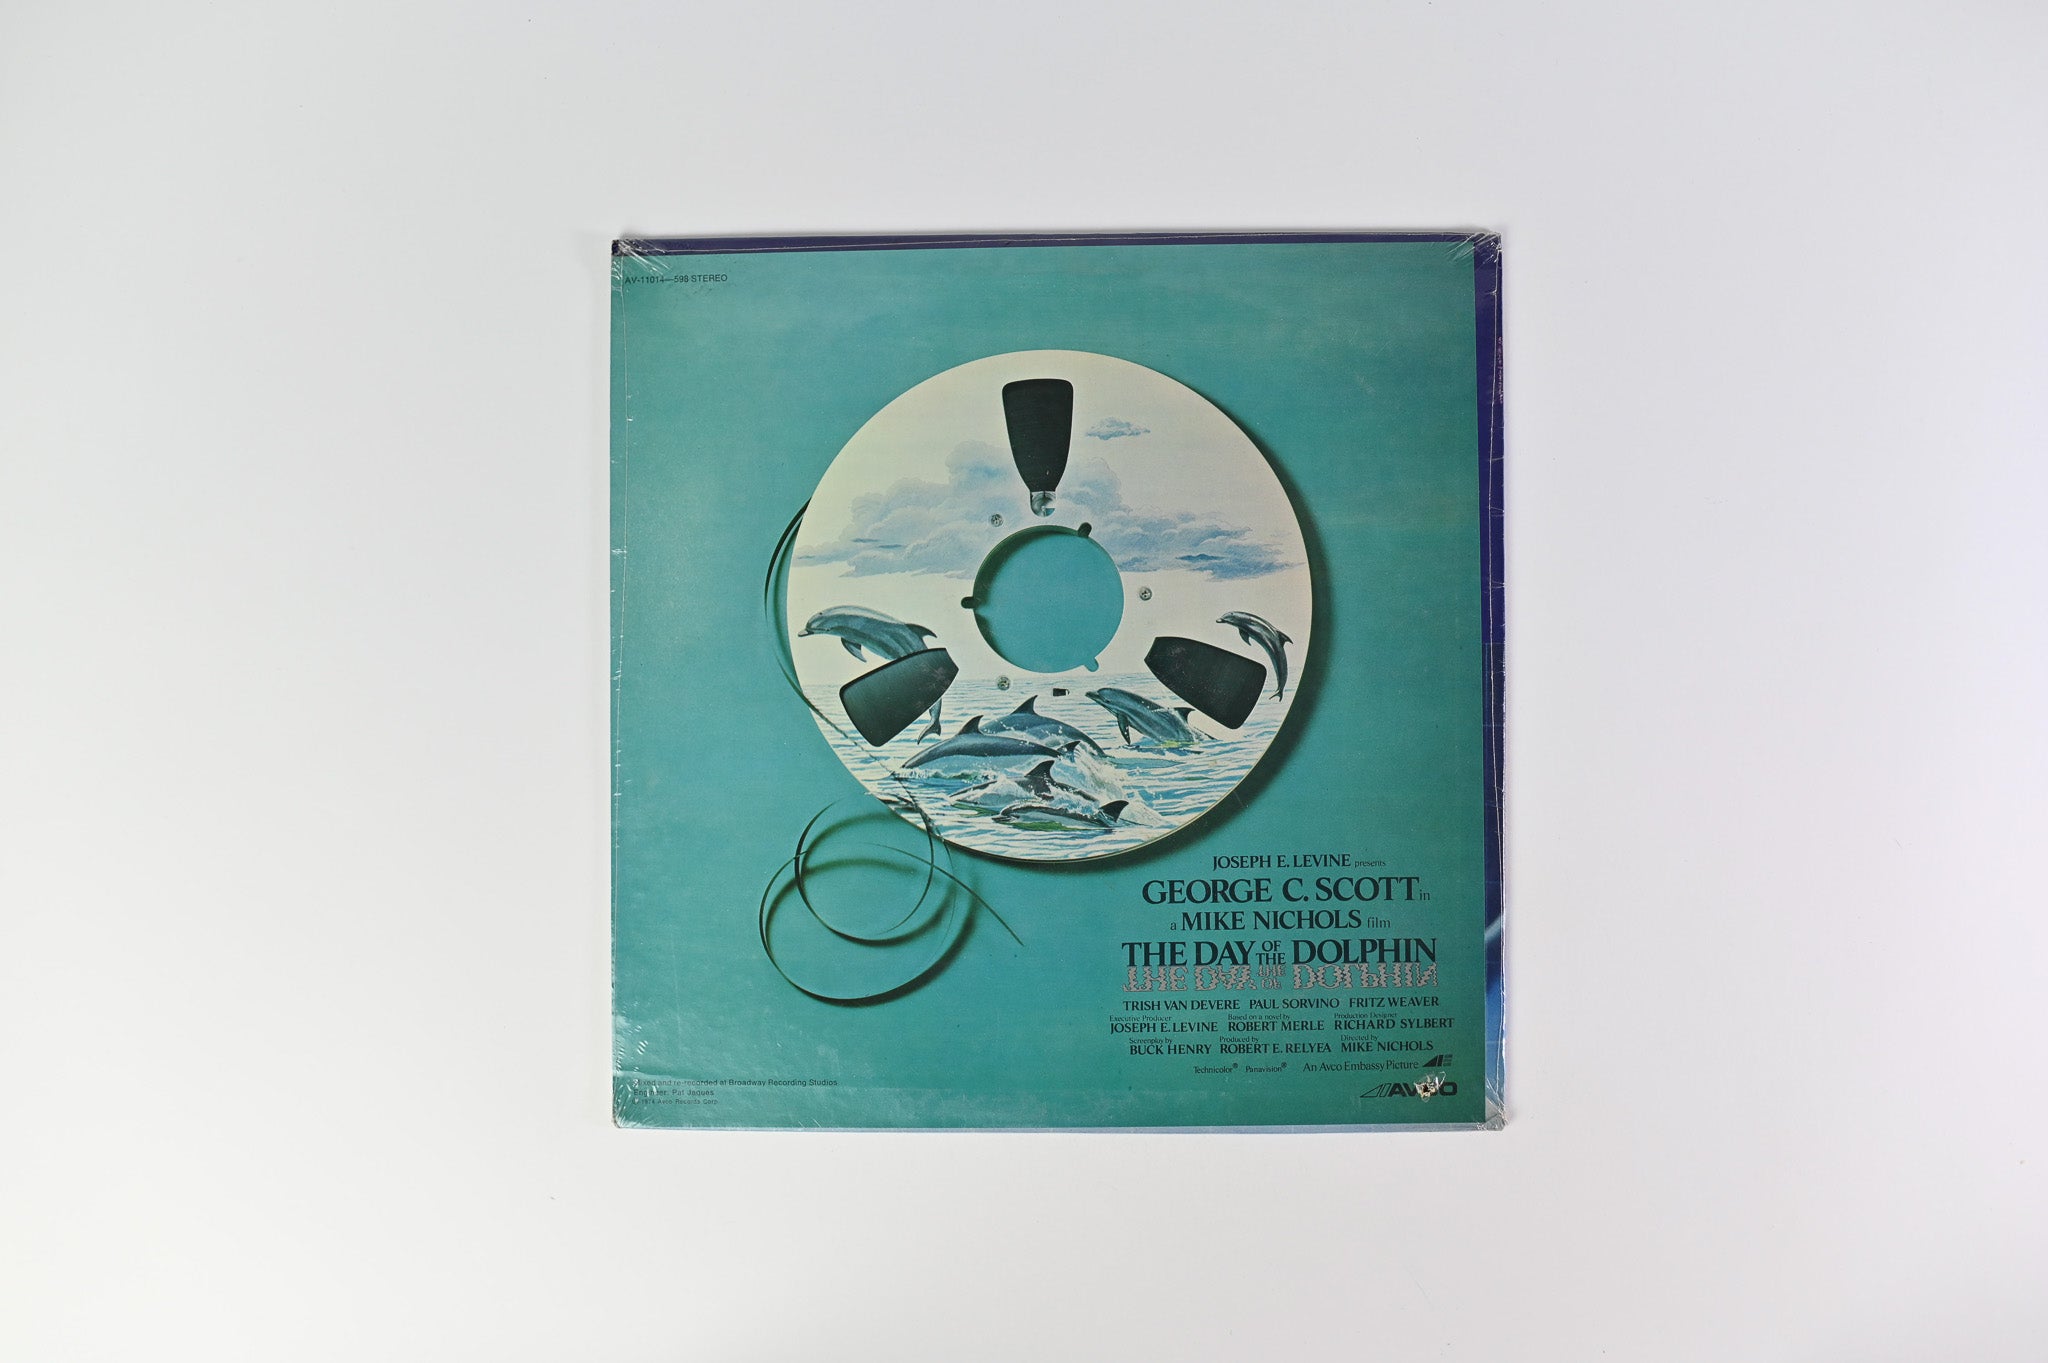 Georges Delerue - The Day Of The Dolphin (Original Soundtrack) on Avco Sealed